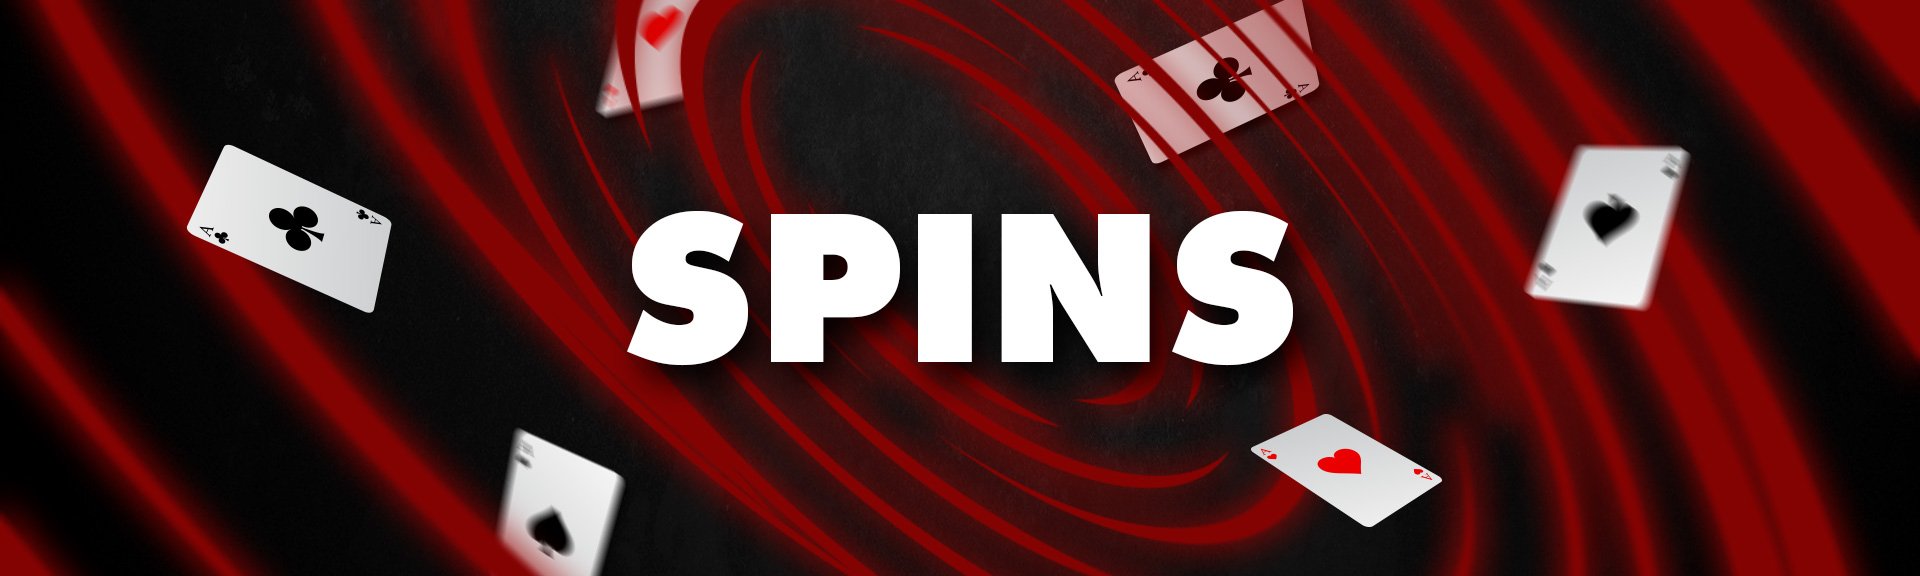 Spin tournaments